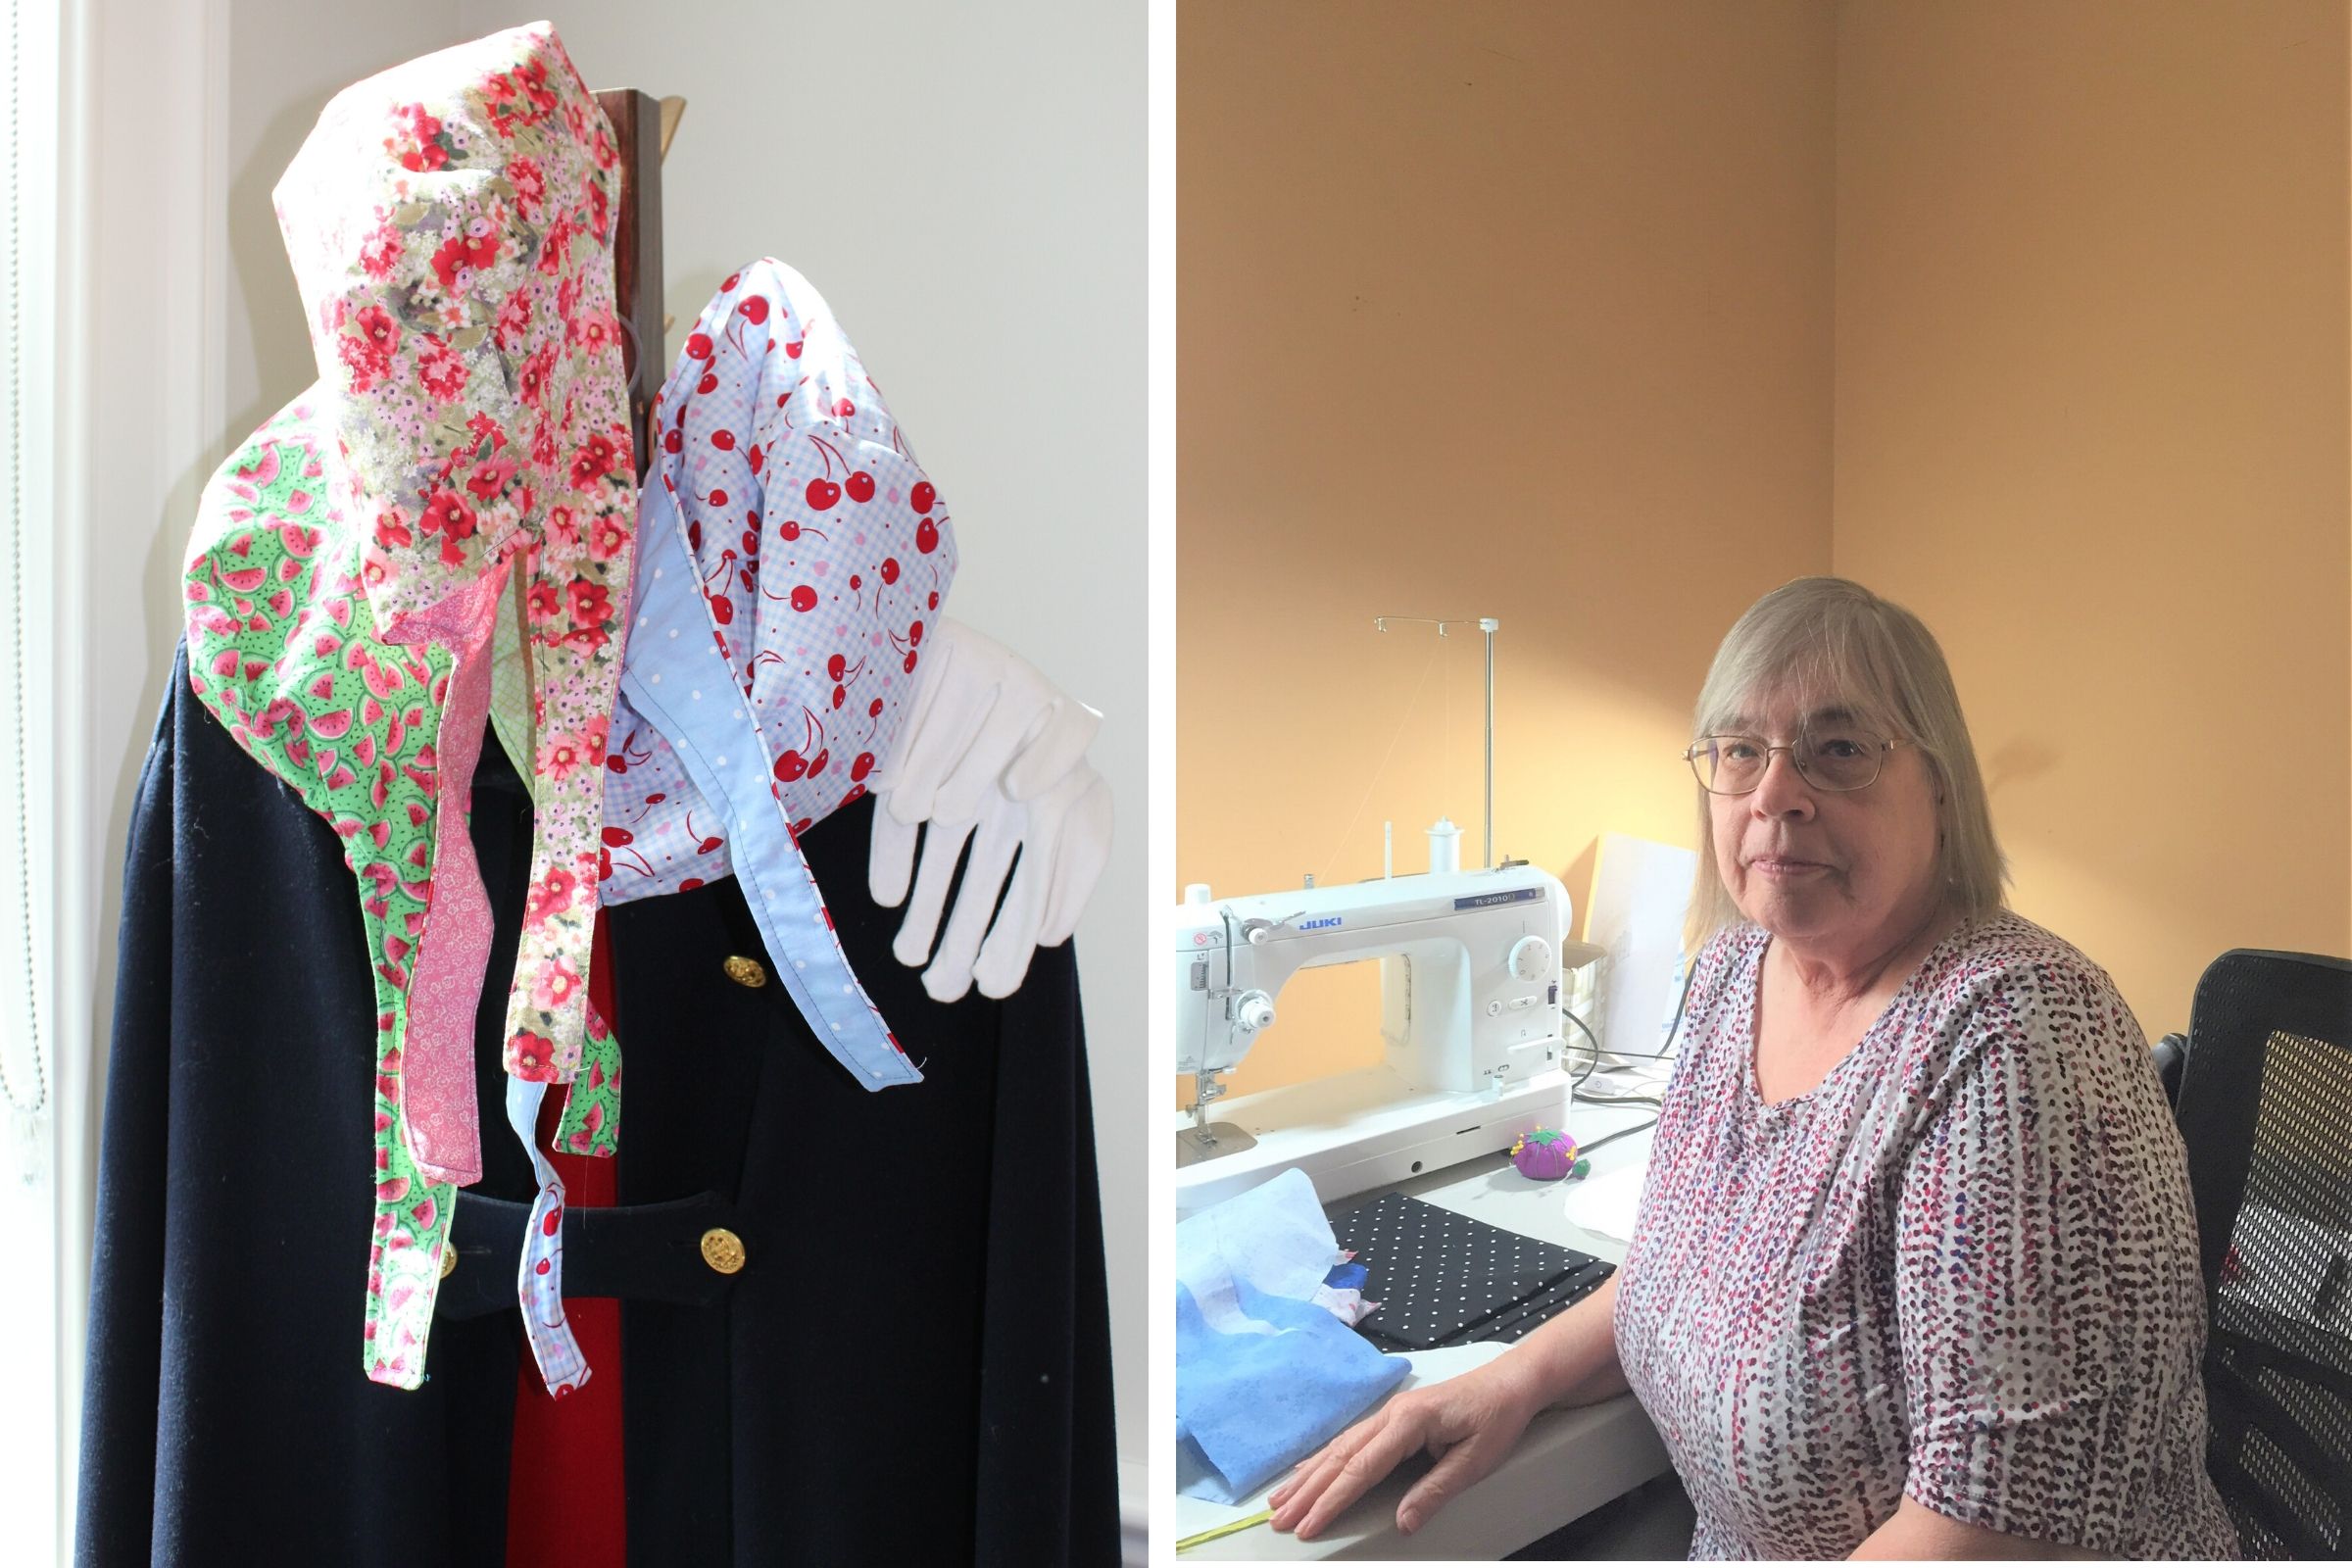 Bonnets that Christine Burnett made for RVNAhealth nurses to protect their hair during COVID-19 hang on a coat stand in our lobby. To the right is a photo of Christine at her sewing machine.